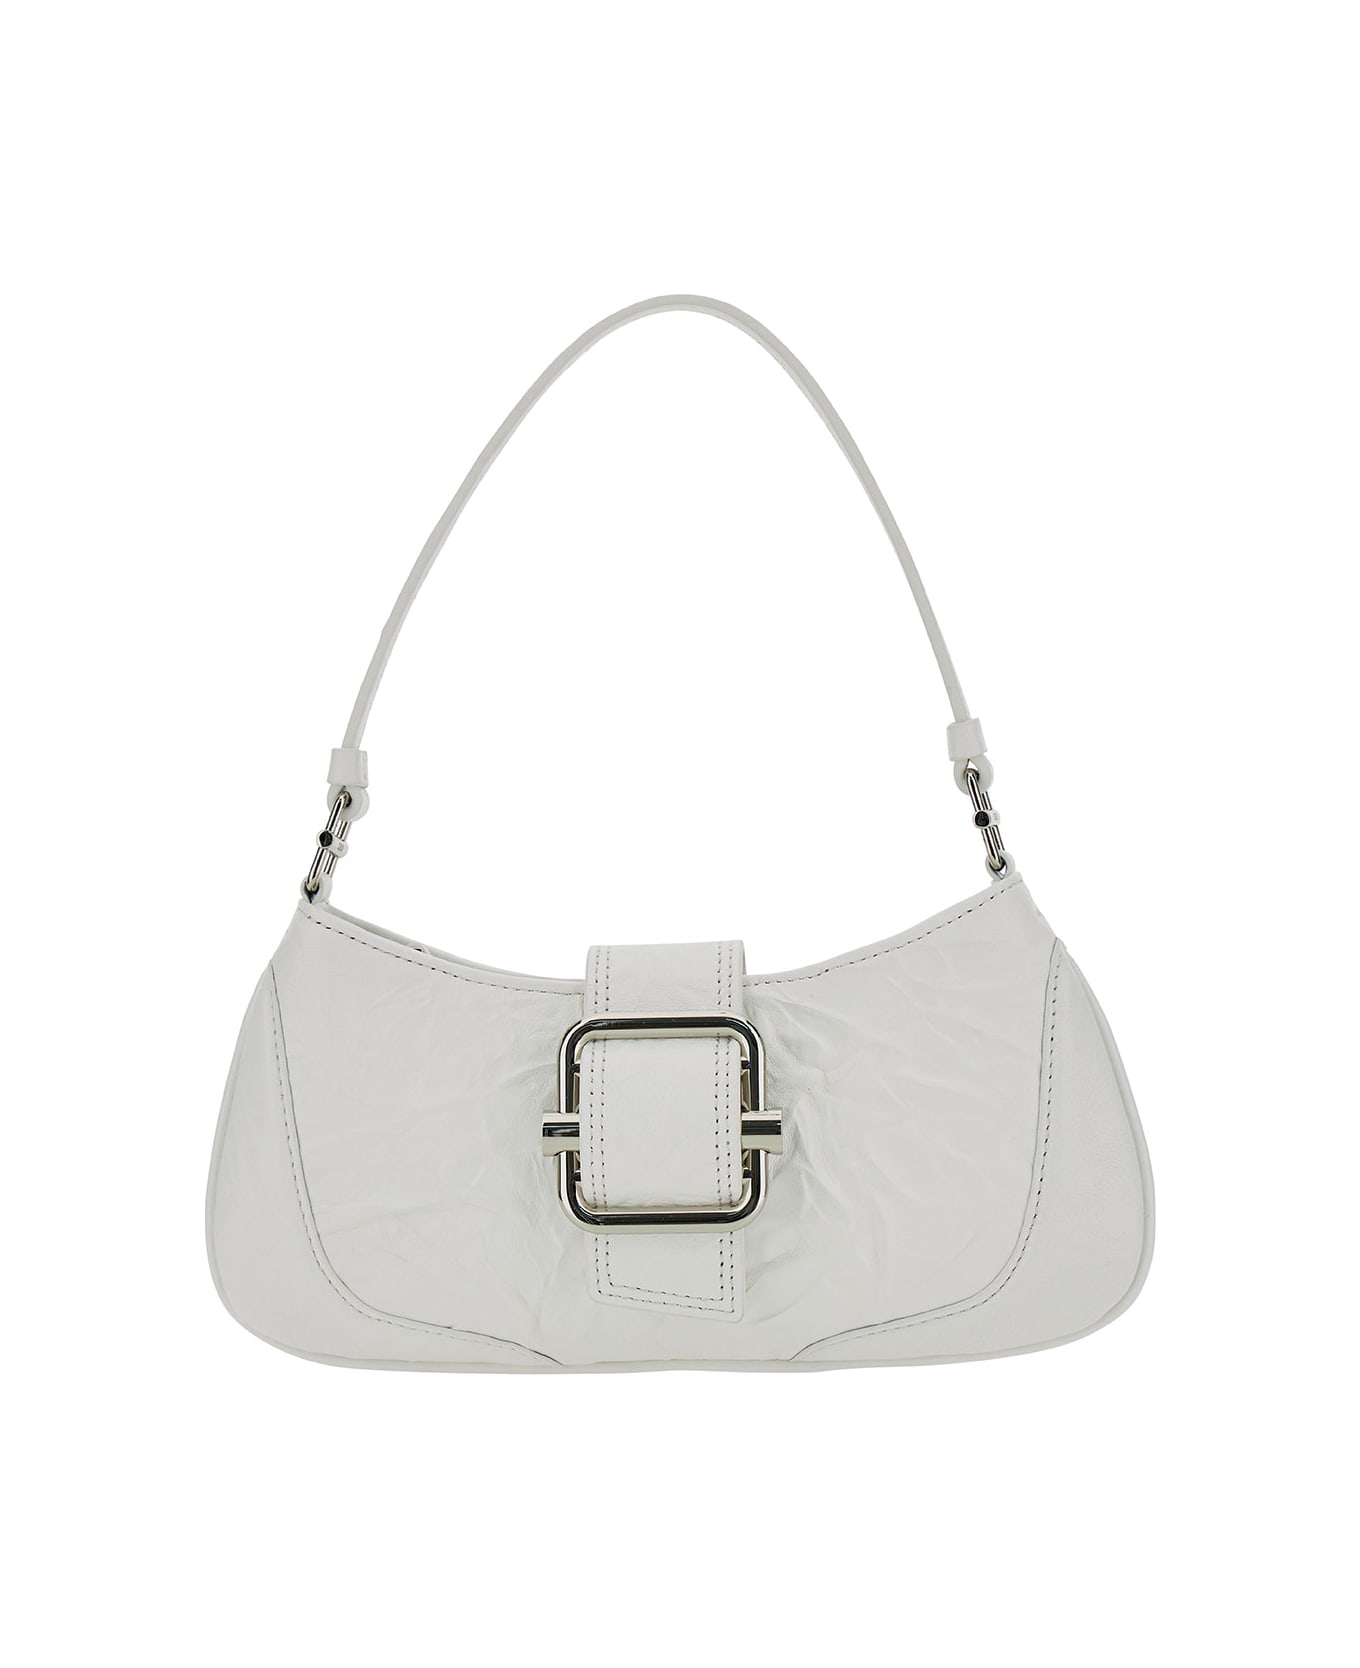 OSOI 'small Brocle' White Shoulder Bag In Hammered Leather Woman - White